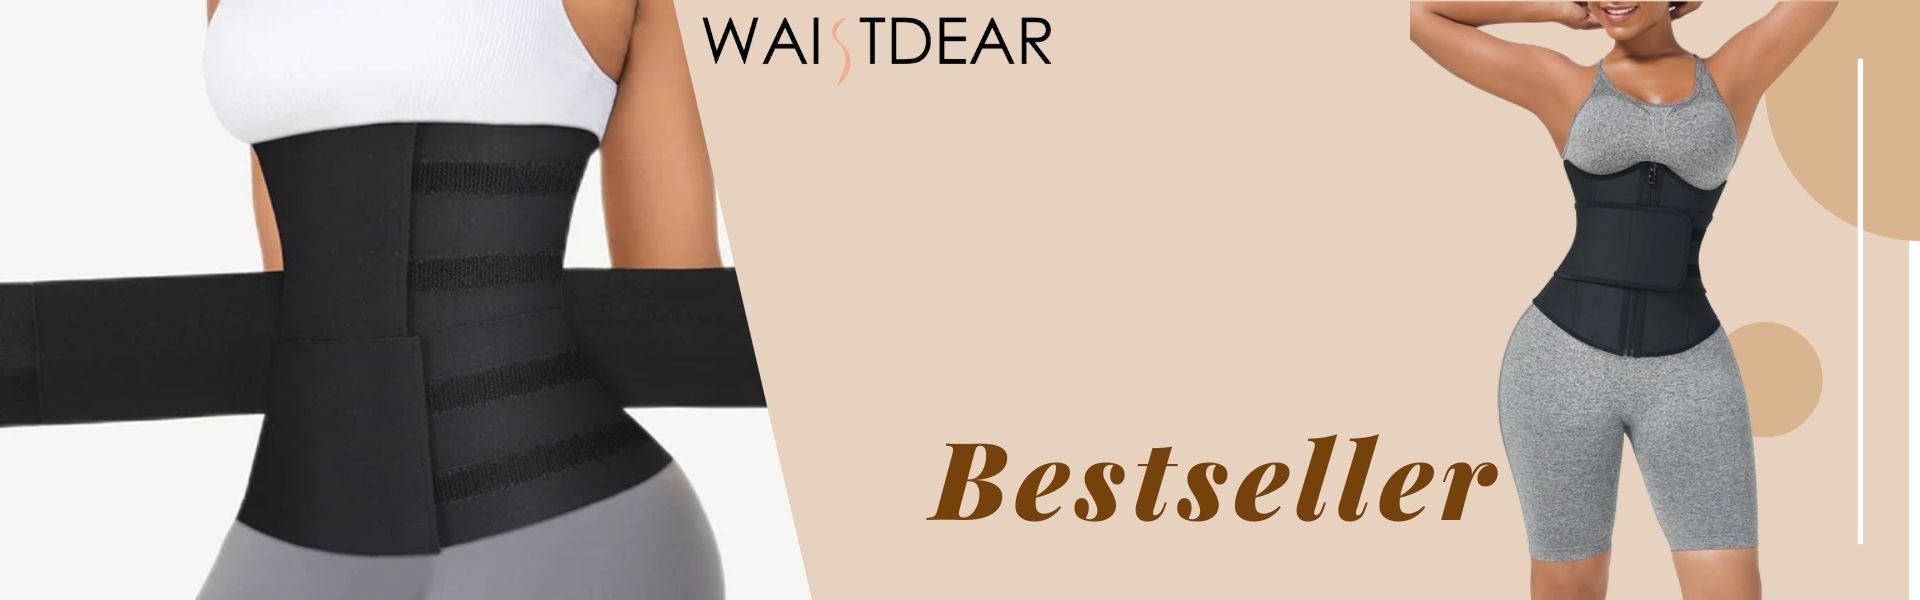 What Kind Of Waist Trainers Are Bestseller